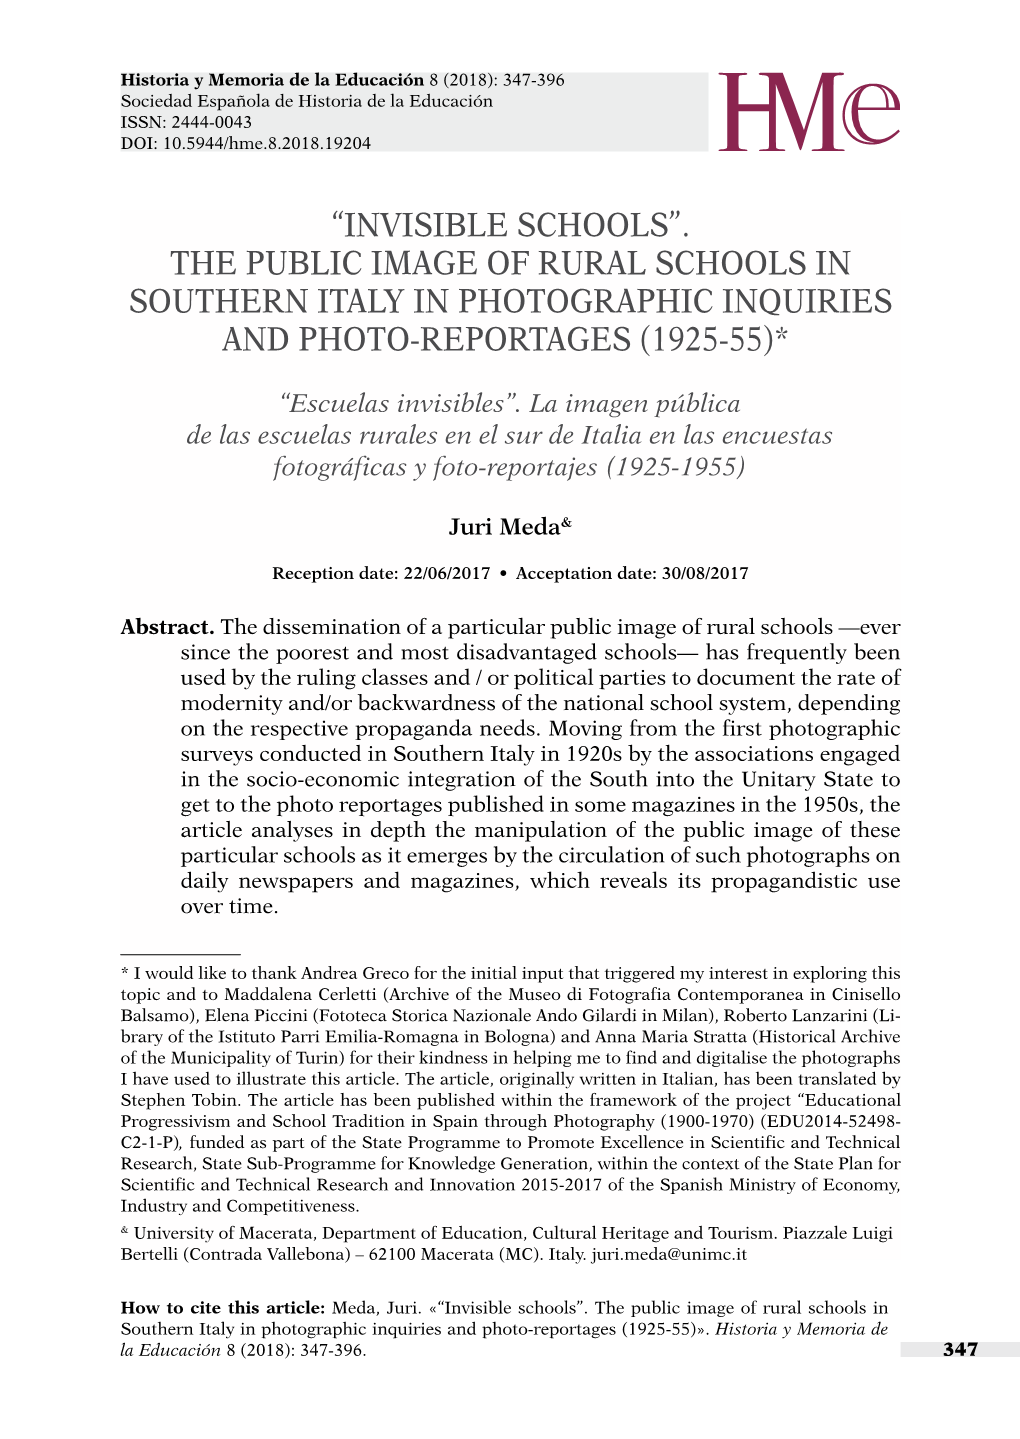 The Public Image of Rural Schools in Southern Italy in Photographic Inquiries and Photo-Reportages (1925-55)*